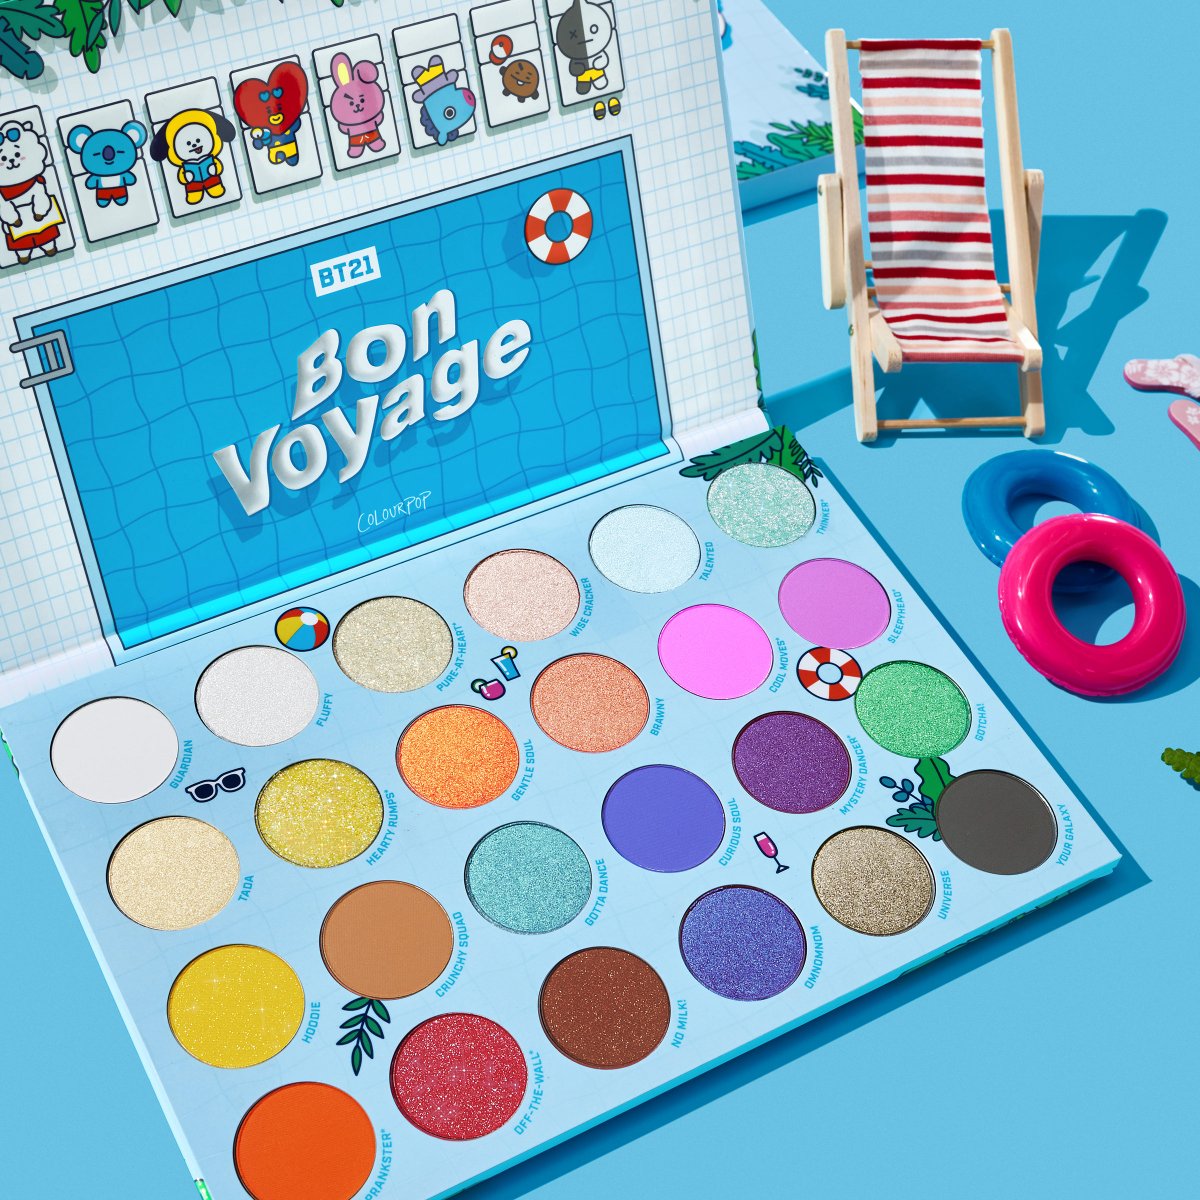 #GIVEAWAY Make a splash this summer! 🌊🌿✨ FIVE winners will receive the BT21 with ColourPop ‘Bon Voyage’ palette!! 🤩

HOW TO ENTER:
1. Follow @colourpopco
2. Like & RT
4. Reply w/ ⛱️